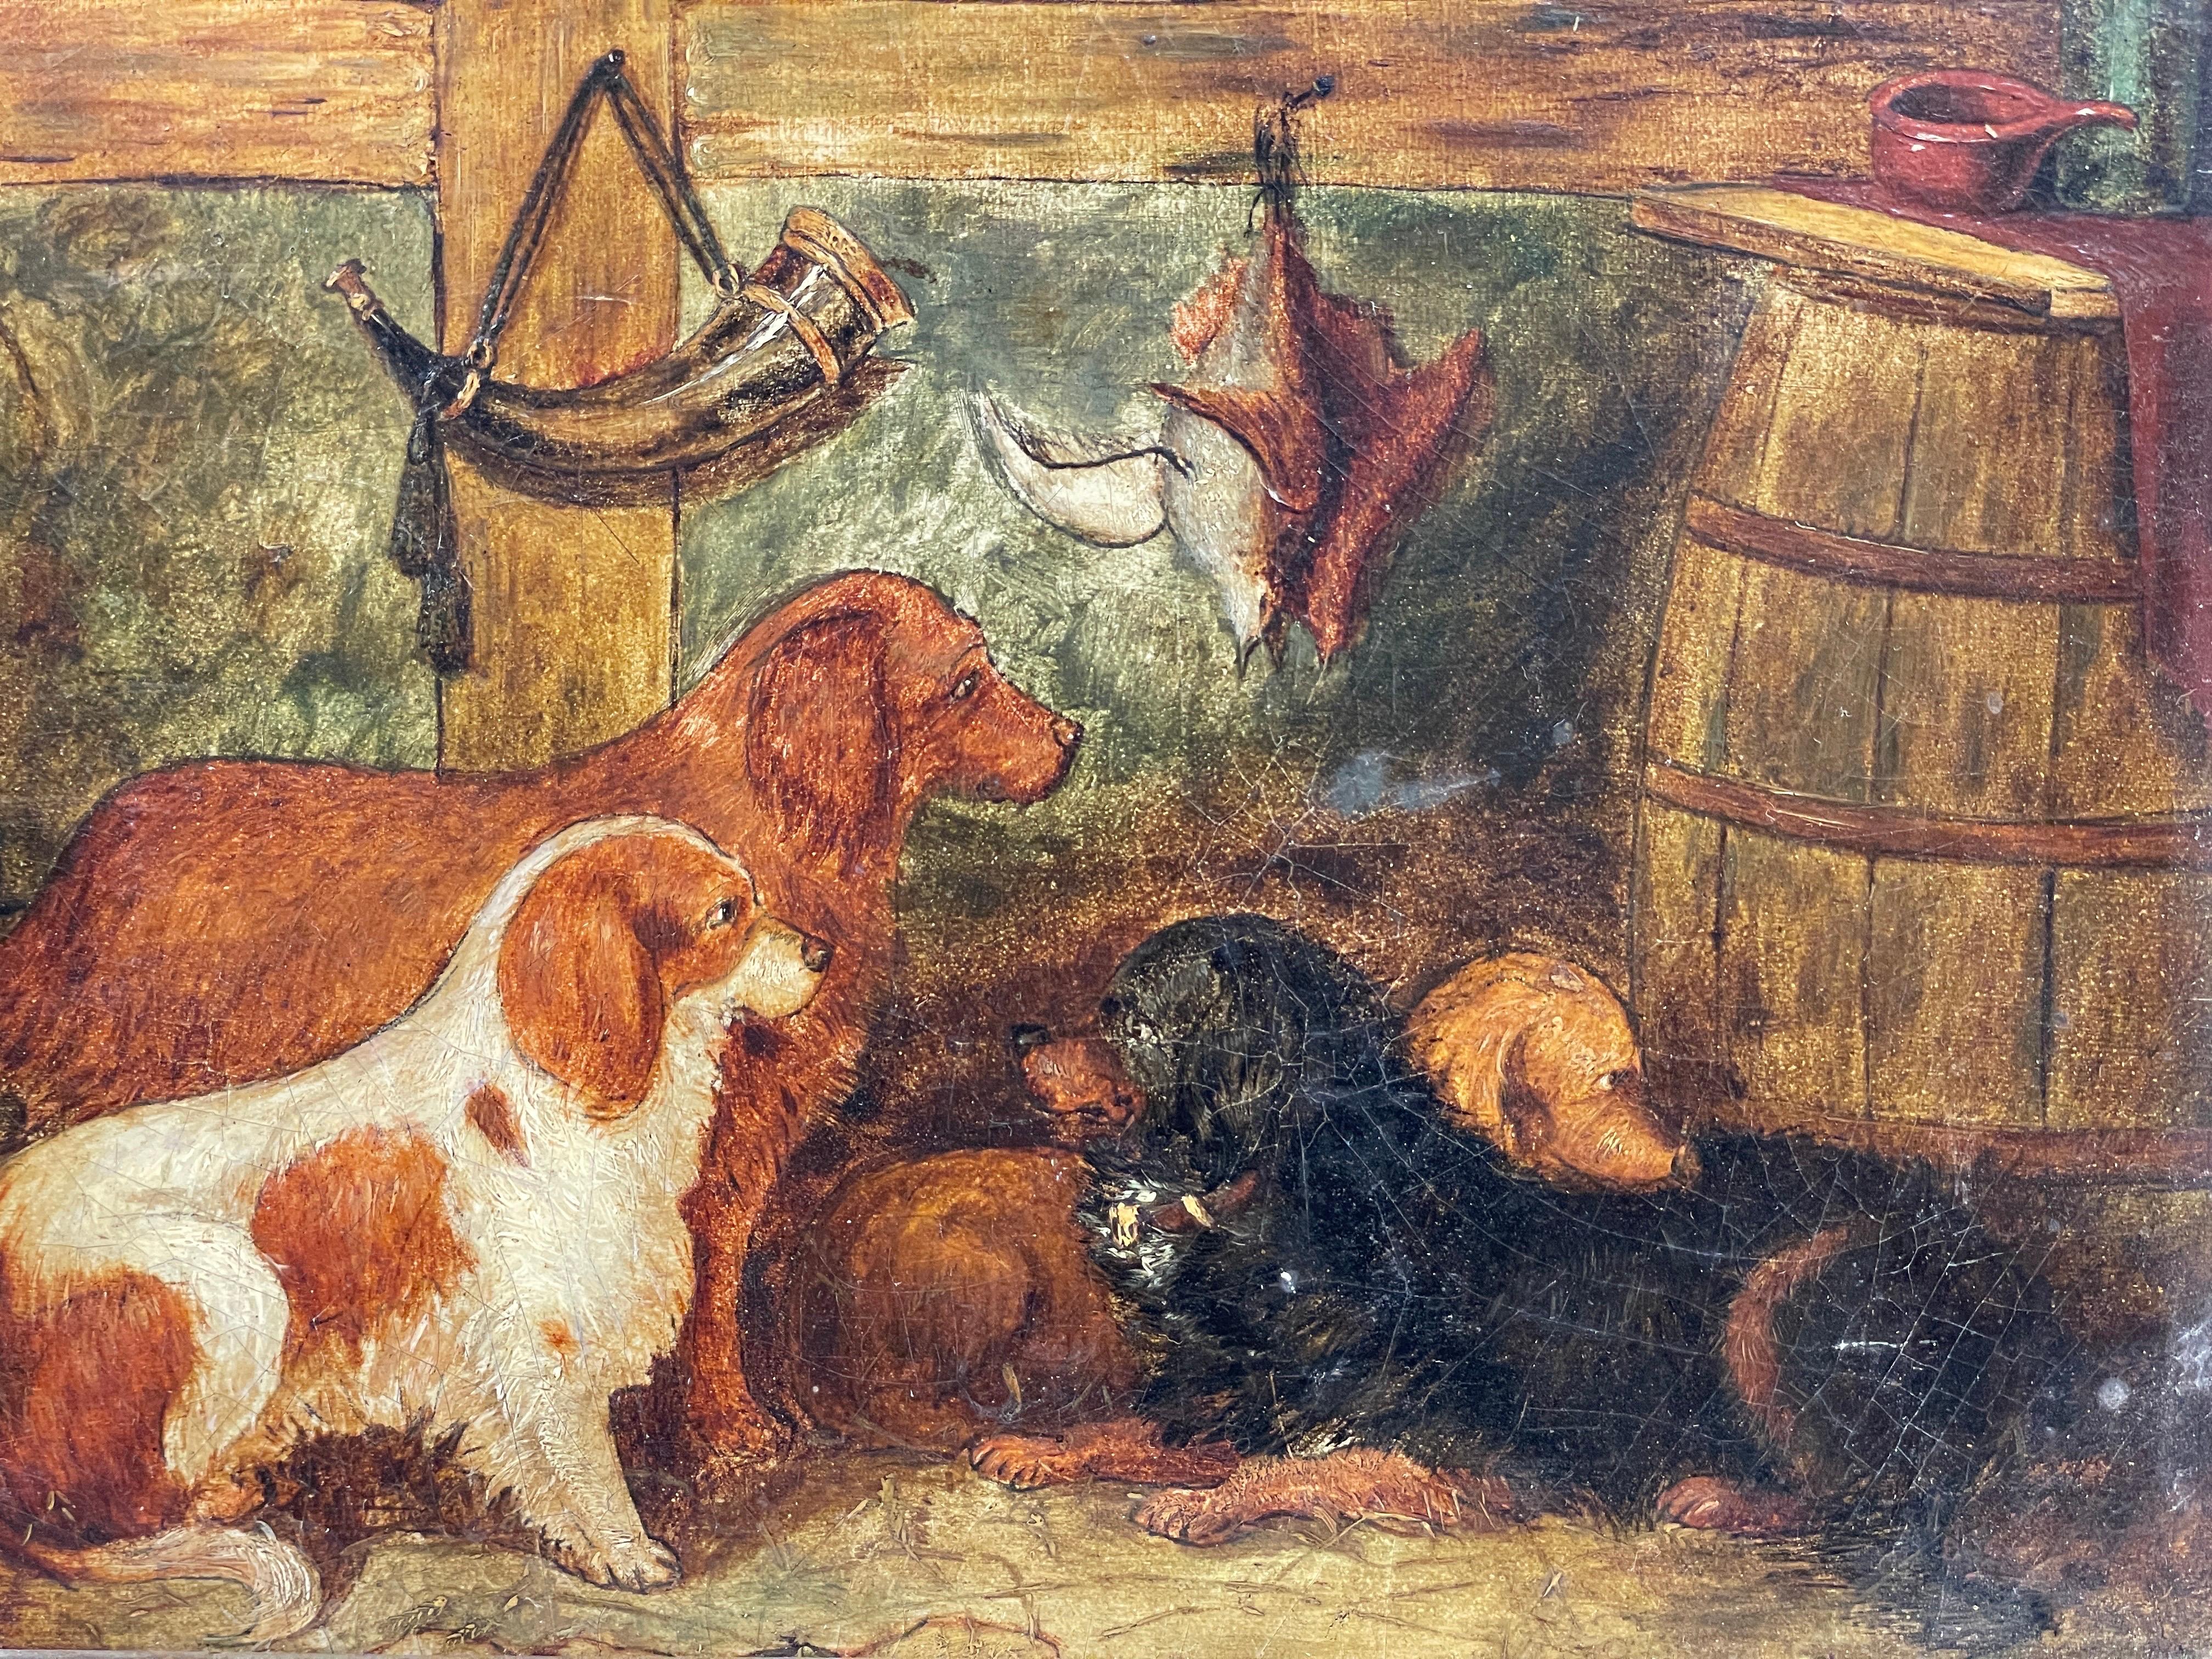 Four Spaniels in Barn Interior
English School, 19th century
oil painting on board, framed
framed size: 9.5 x 11 inches
condition: good condition, a few signs of age but basically good and presentable. The frame is antique and original to the